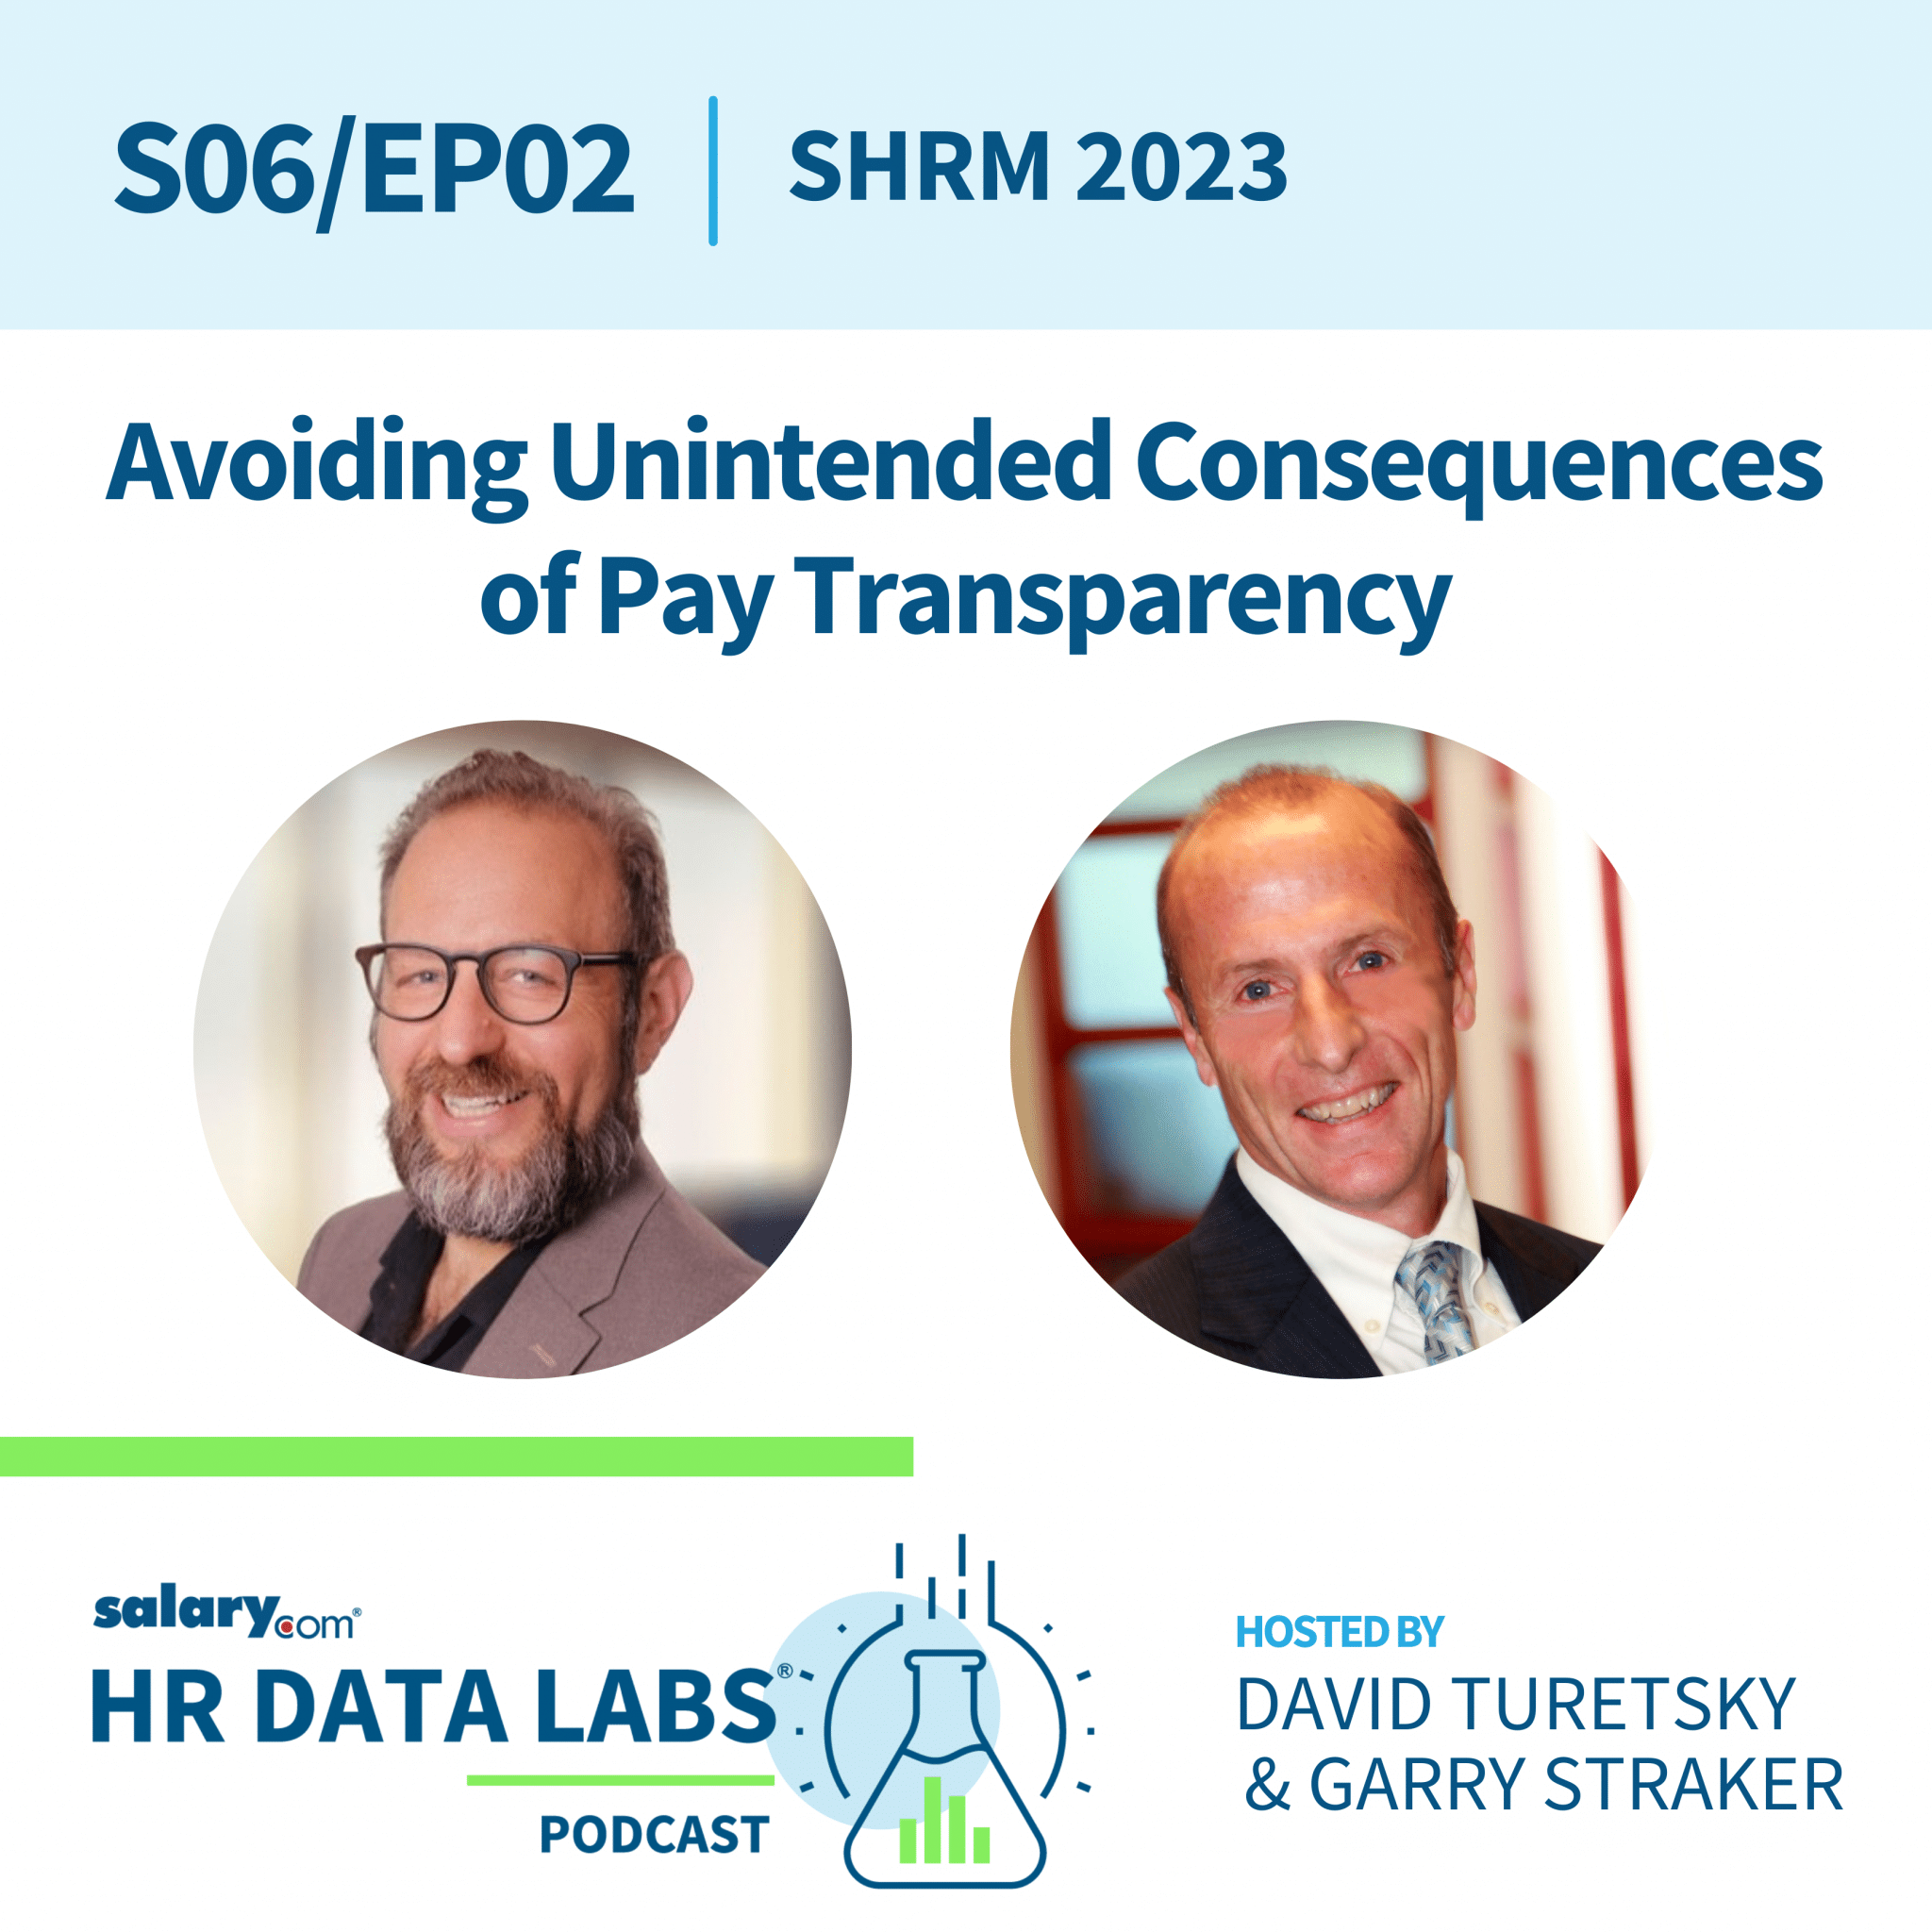 Garry Straker and David Turetsky – SHRM 2023 – Avoiding Unintended Consequences of Pay Transparency